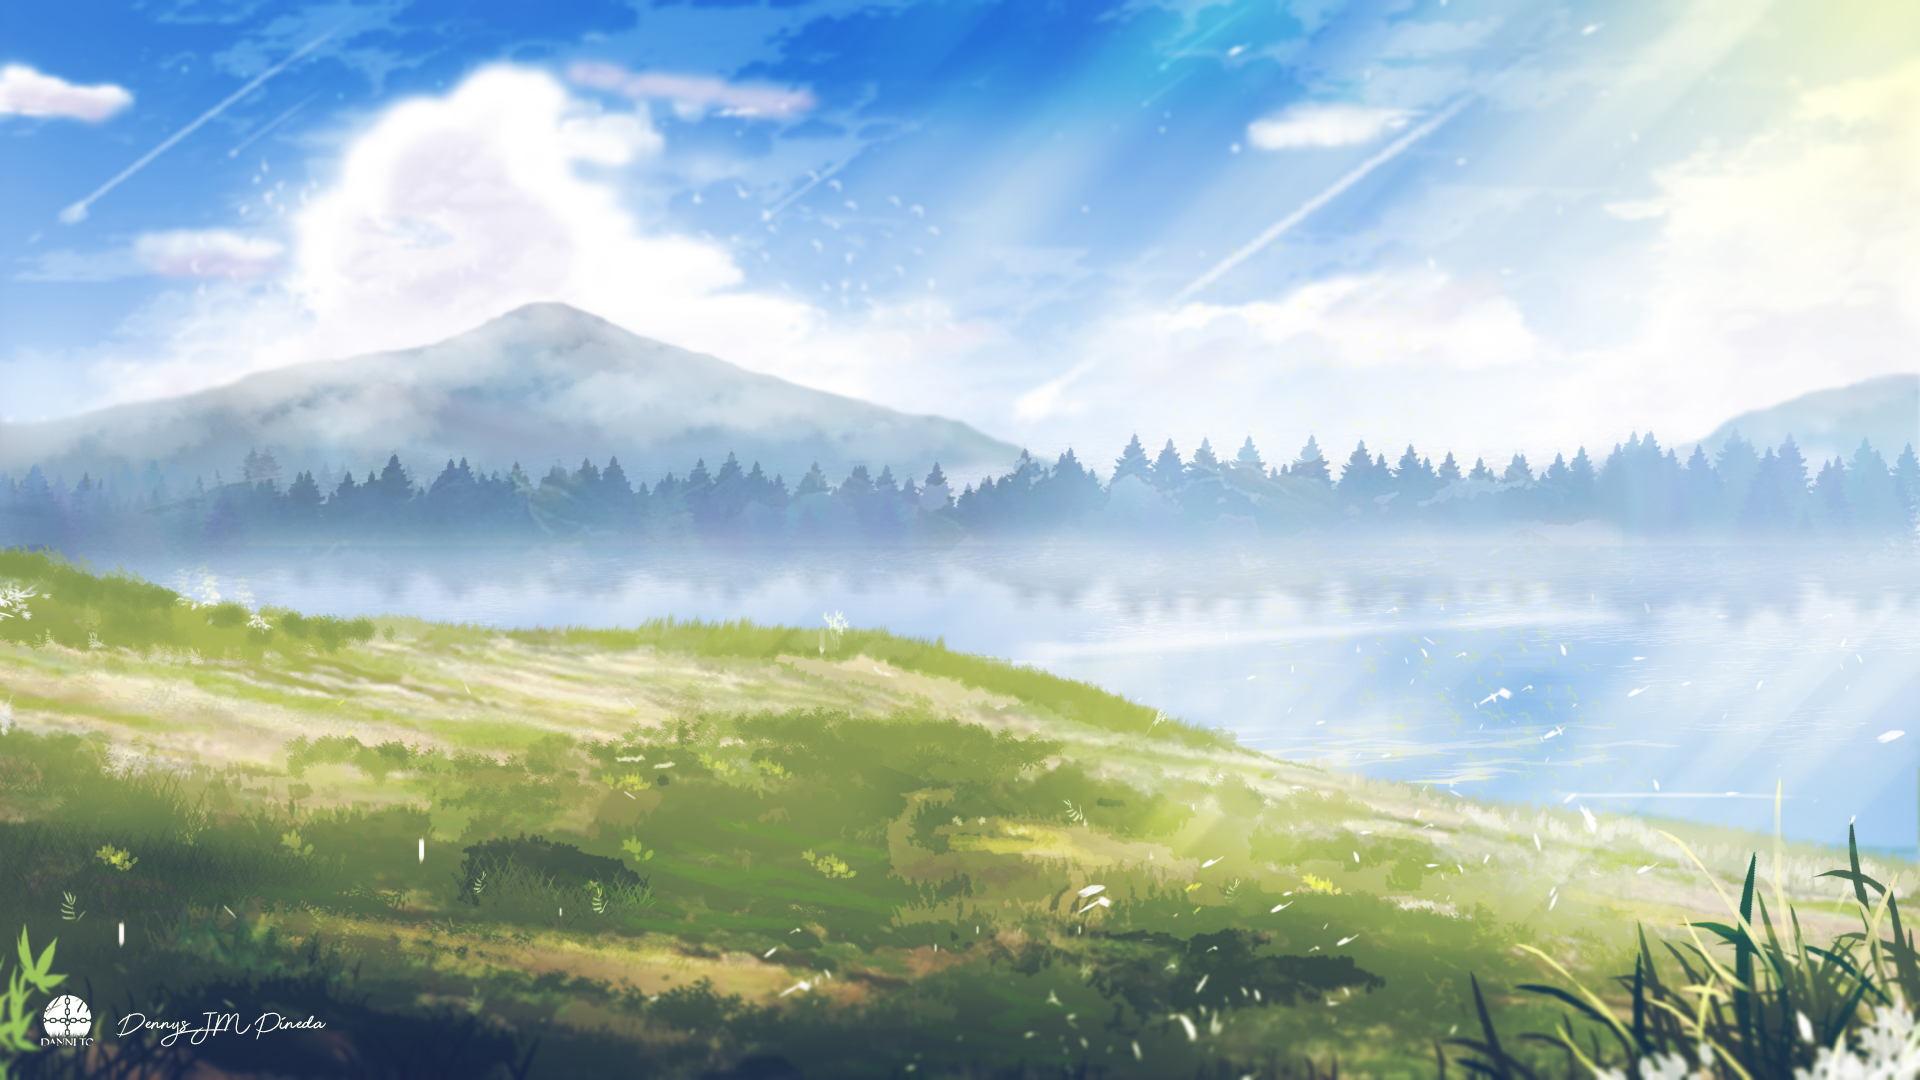 Anime background by dannitolvl on